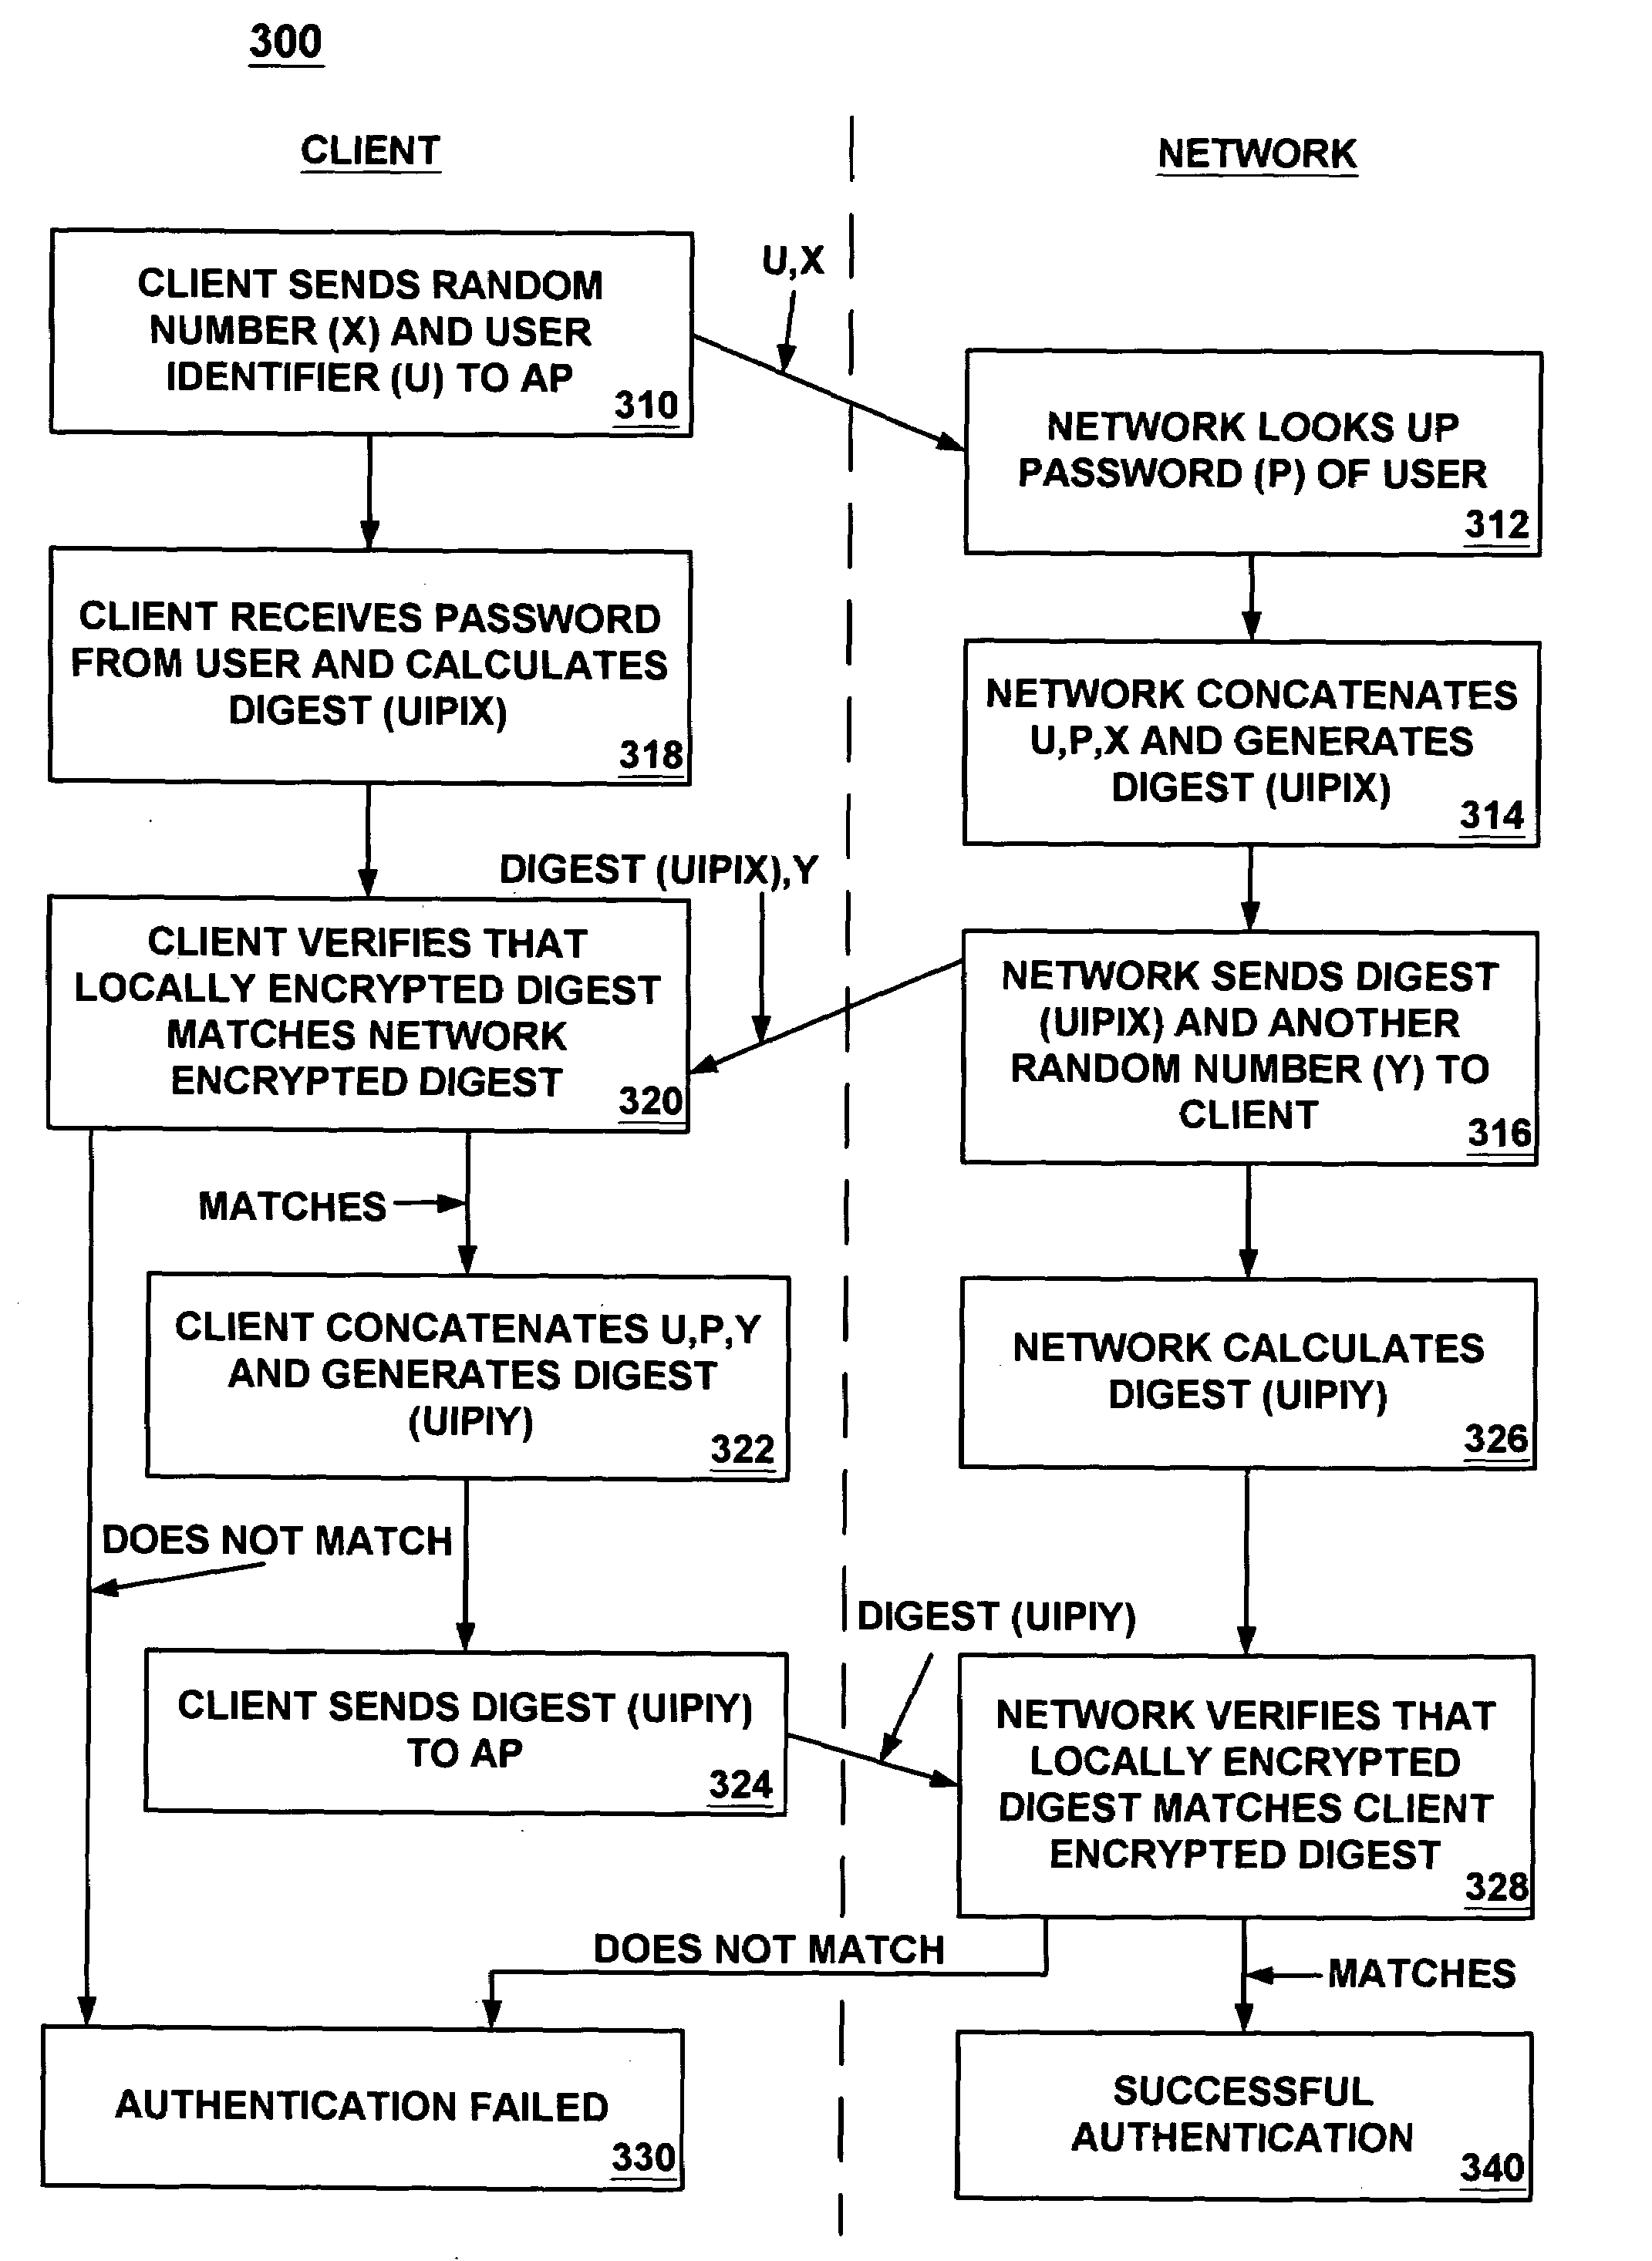 Protected mutual authentication over an unsecured wireless communication channel